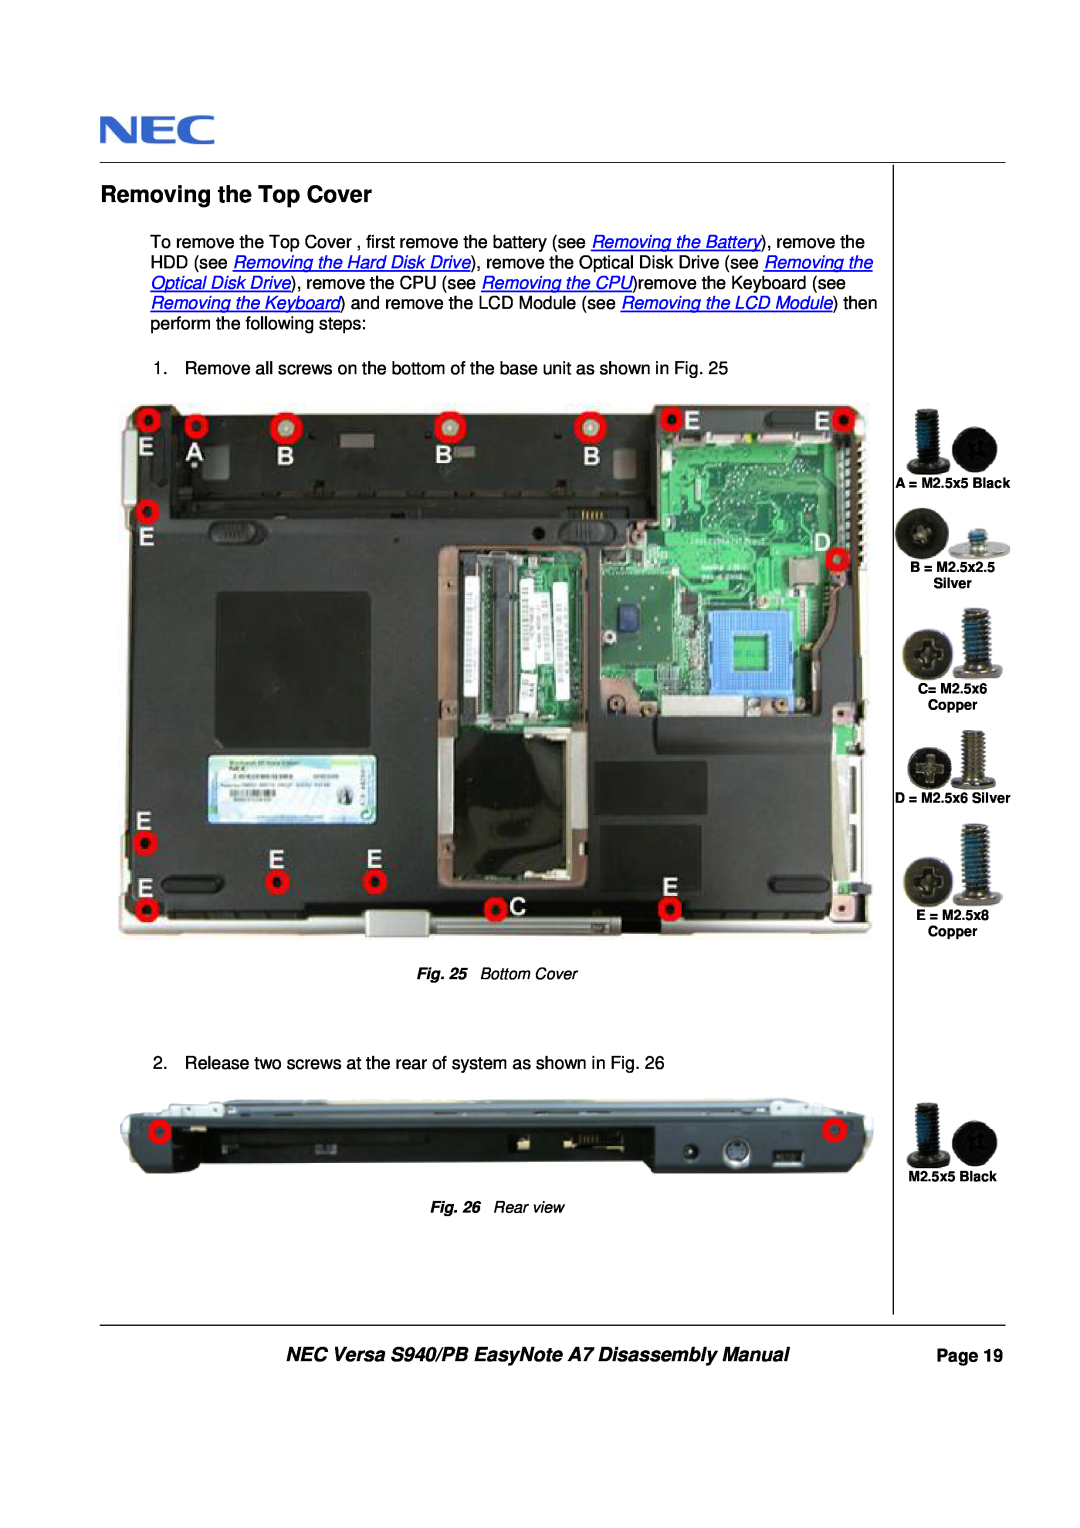 Packard Bell manual Removing the Top Cover, NEC Versa S940/PB EasyNote A7 Disassembly Manual 